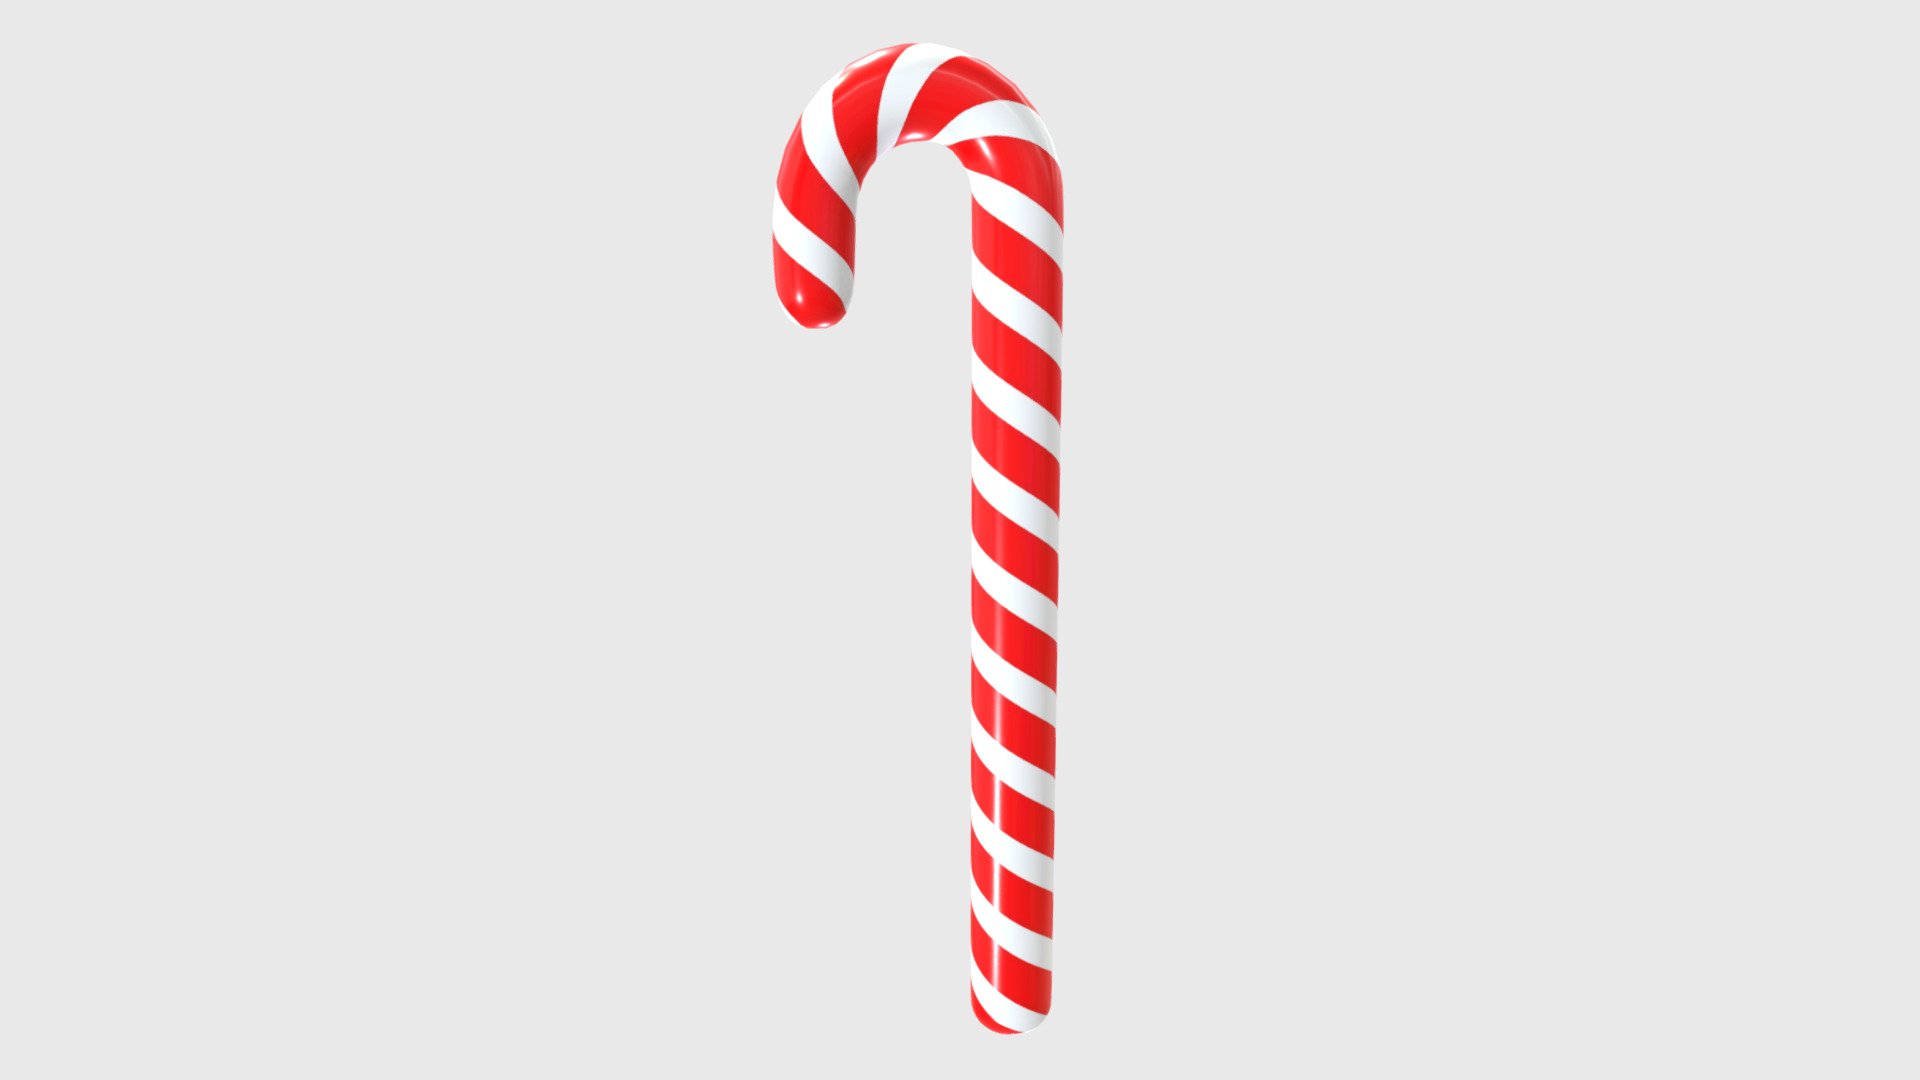 A textured 3D model of a candy cane. Merry Christmas!

Other colors!

green: https://skfb.ly/oOrsI

blue: https://skfb.ly/oOrtB

red and green: https://skfb.ly/oOrvM

pink: https://skfb.ly/oOrvN - Candy Cane Prop - Download Free 3D model by BojackArt 3d model